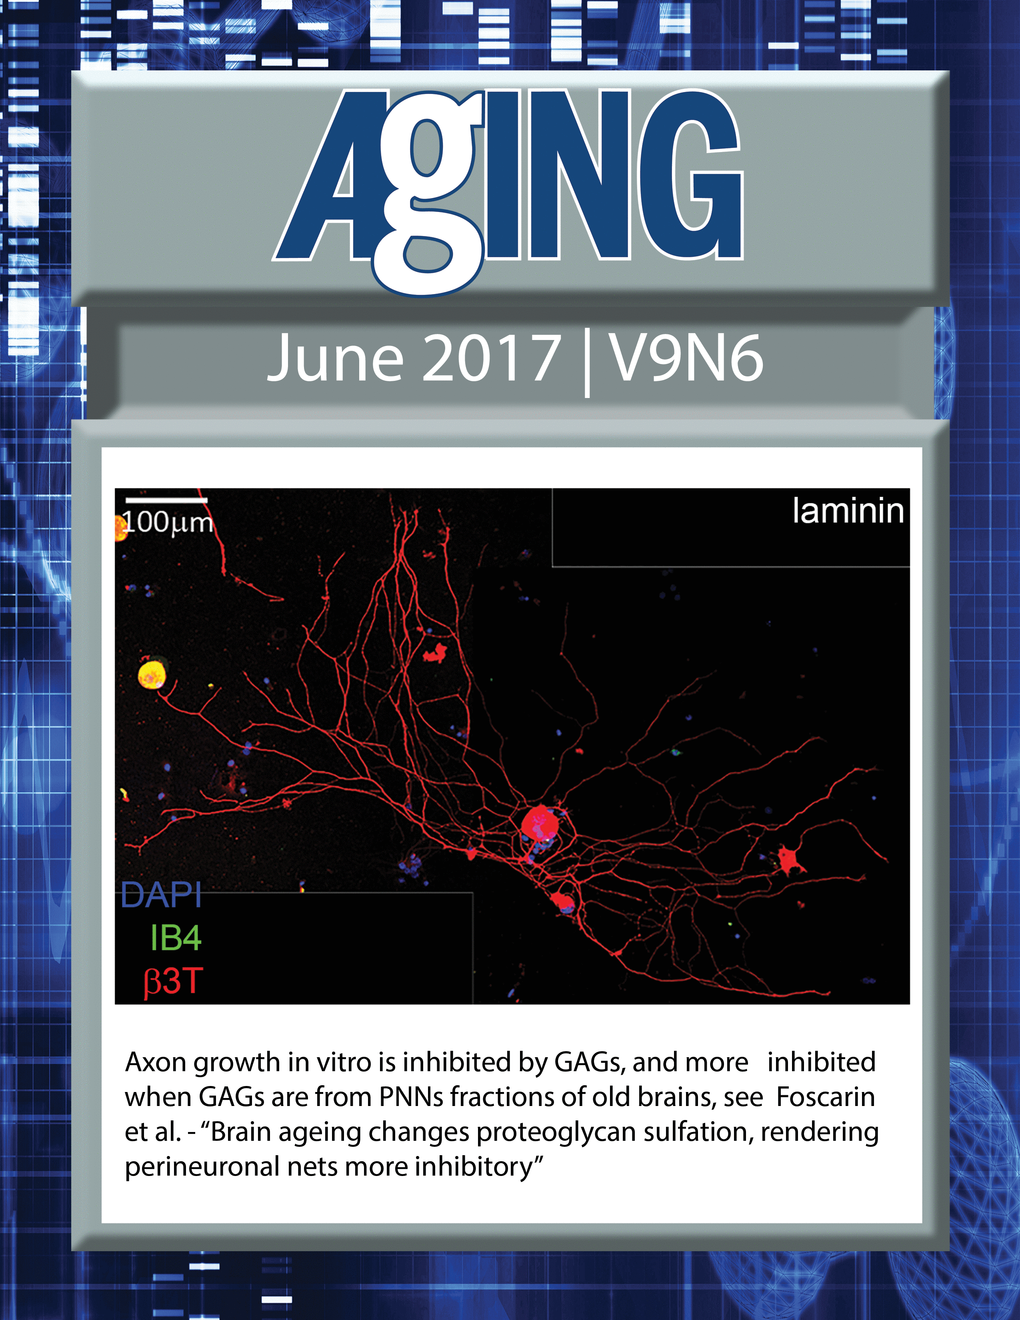 The cover for issue 6 of Aging features Figure 5C, "Axon growth in vitro is inhibited by GAGs, and more inhibited when GAGs are from PNNs fractions of old brains" from Foscarin et al.